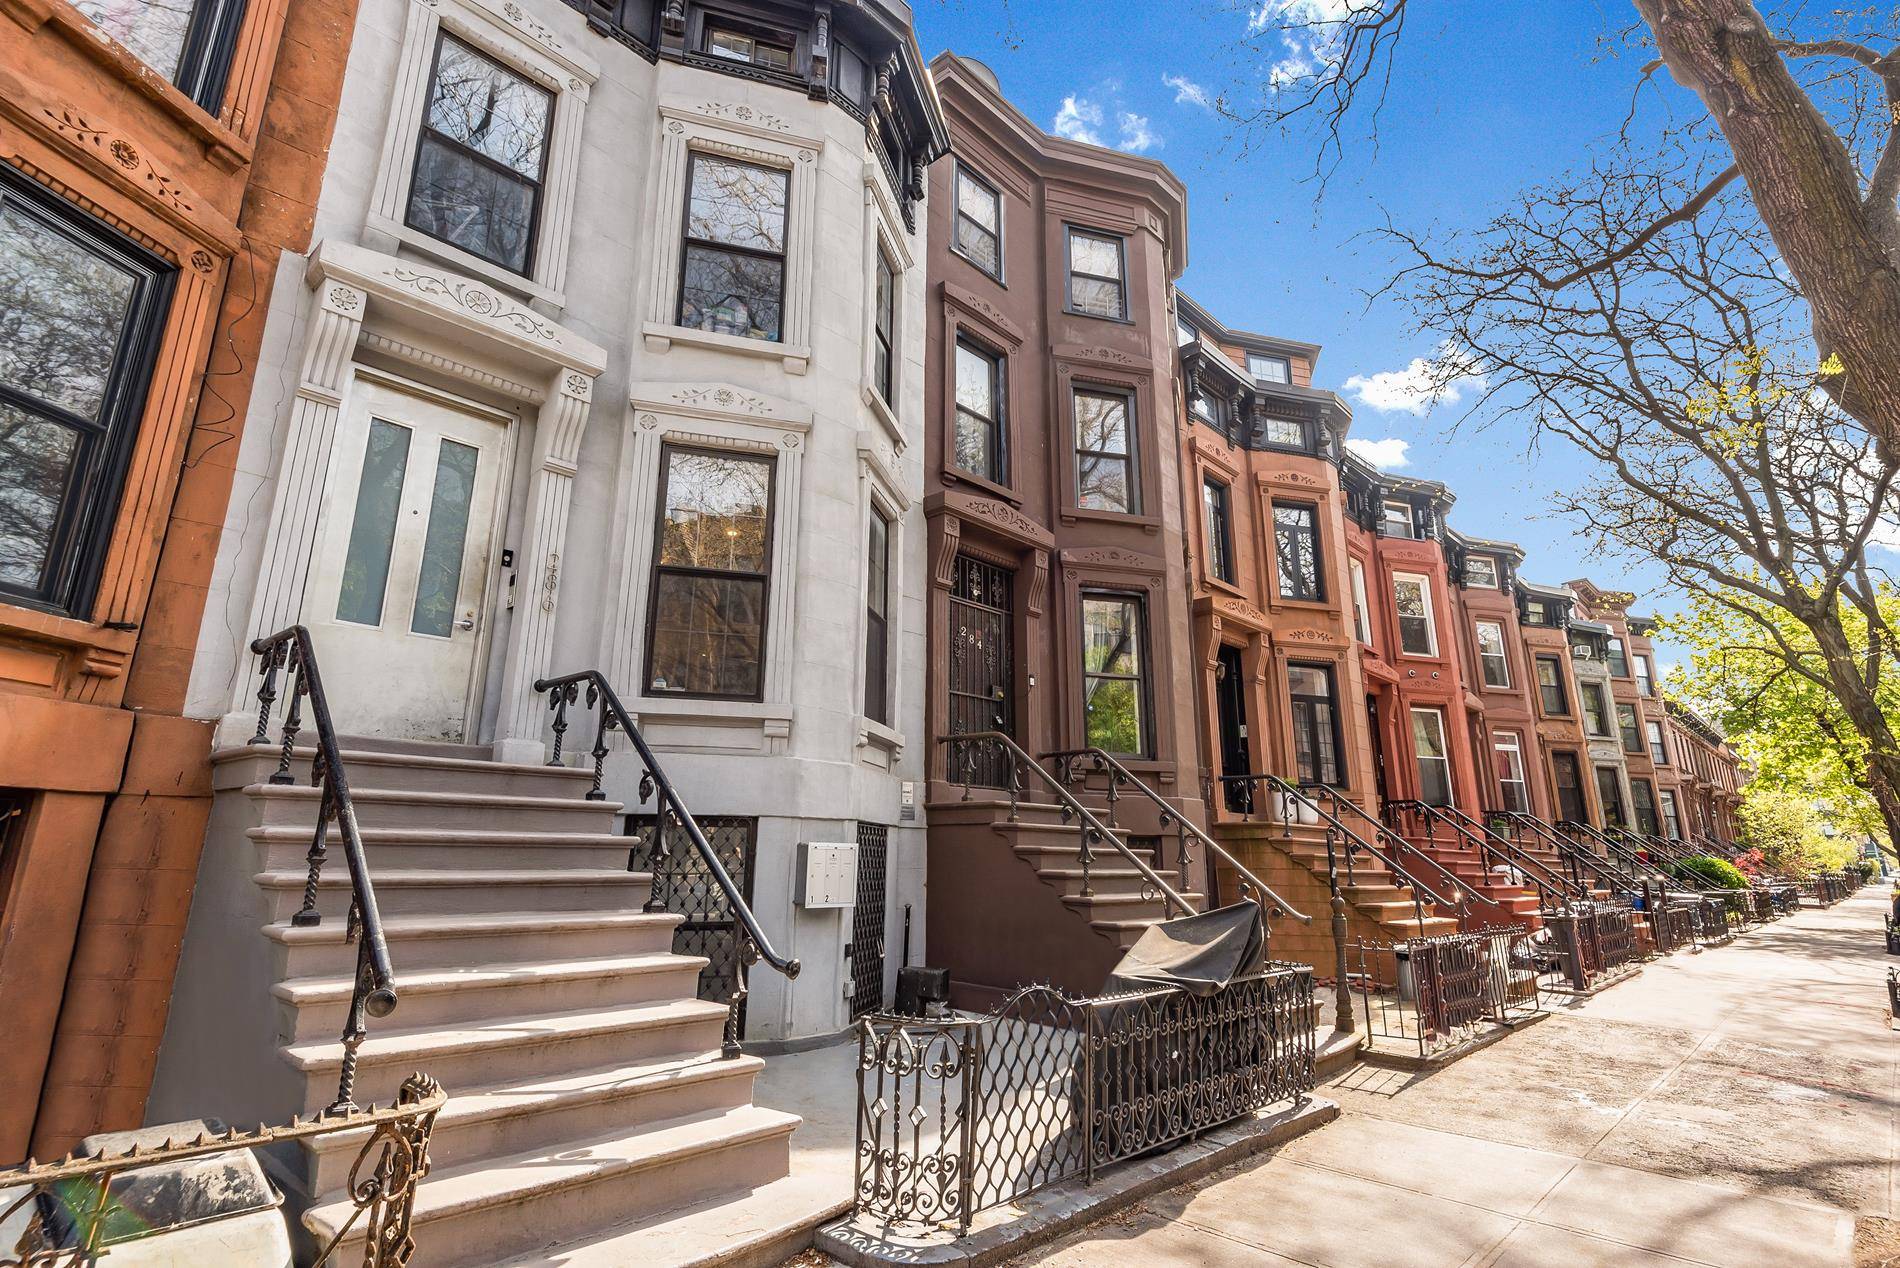 Beautiful brownstone in Prime Bedstuy, between Nostrand and Bedford, steps from Clinton hill and Herbert Von King Park.